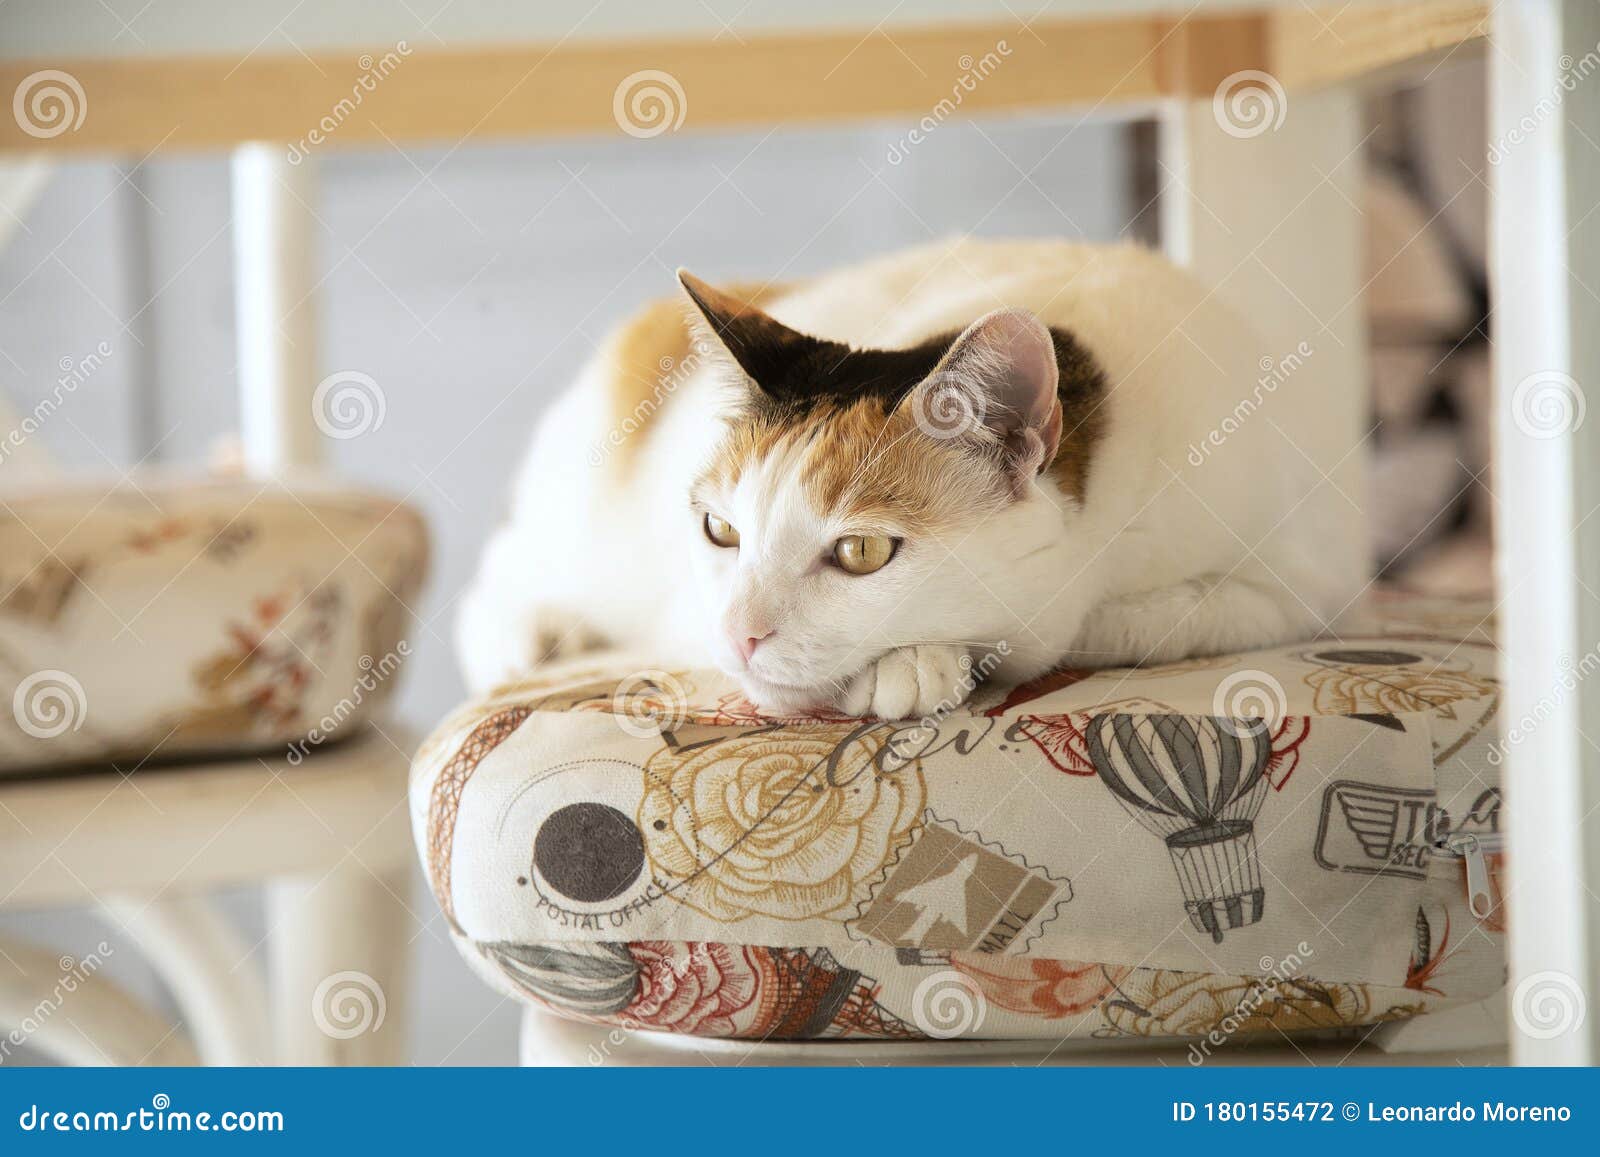 three-color cat resting on seat